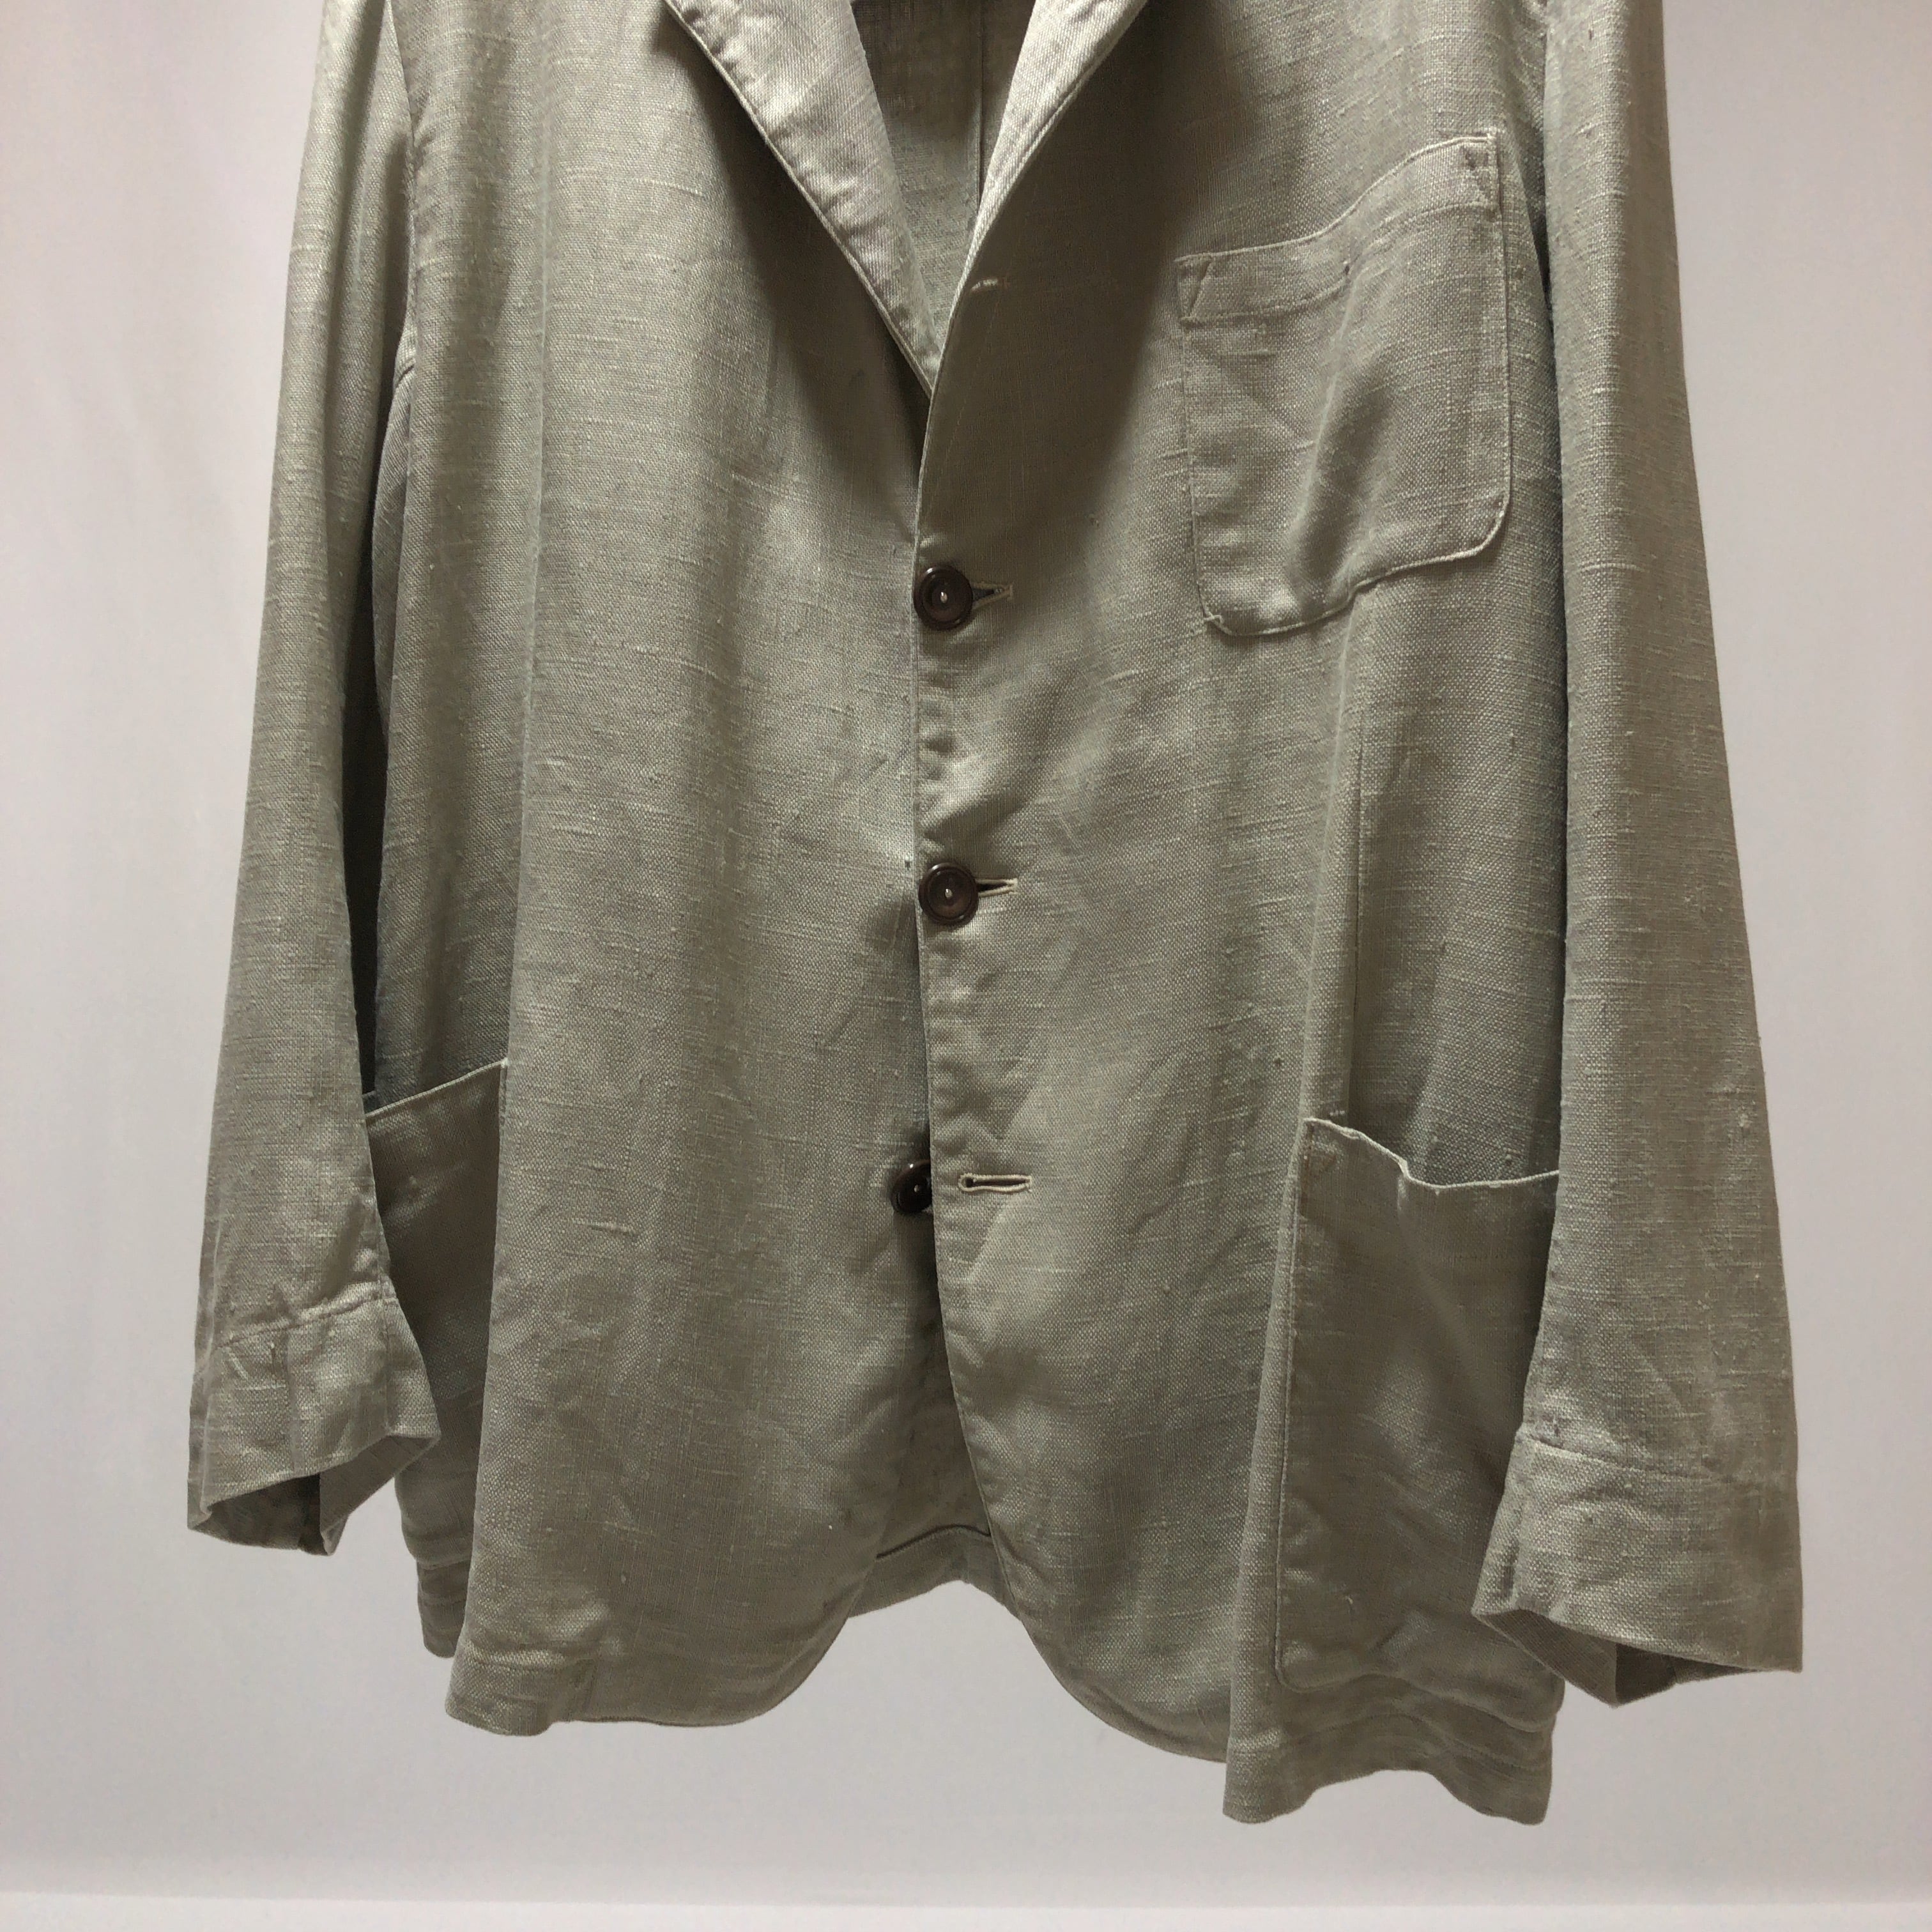 Grenvill / 30-40's Vintage Linen Tailored Jacket / Made in England ...